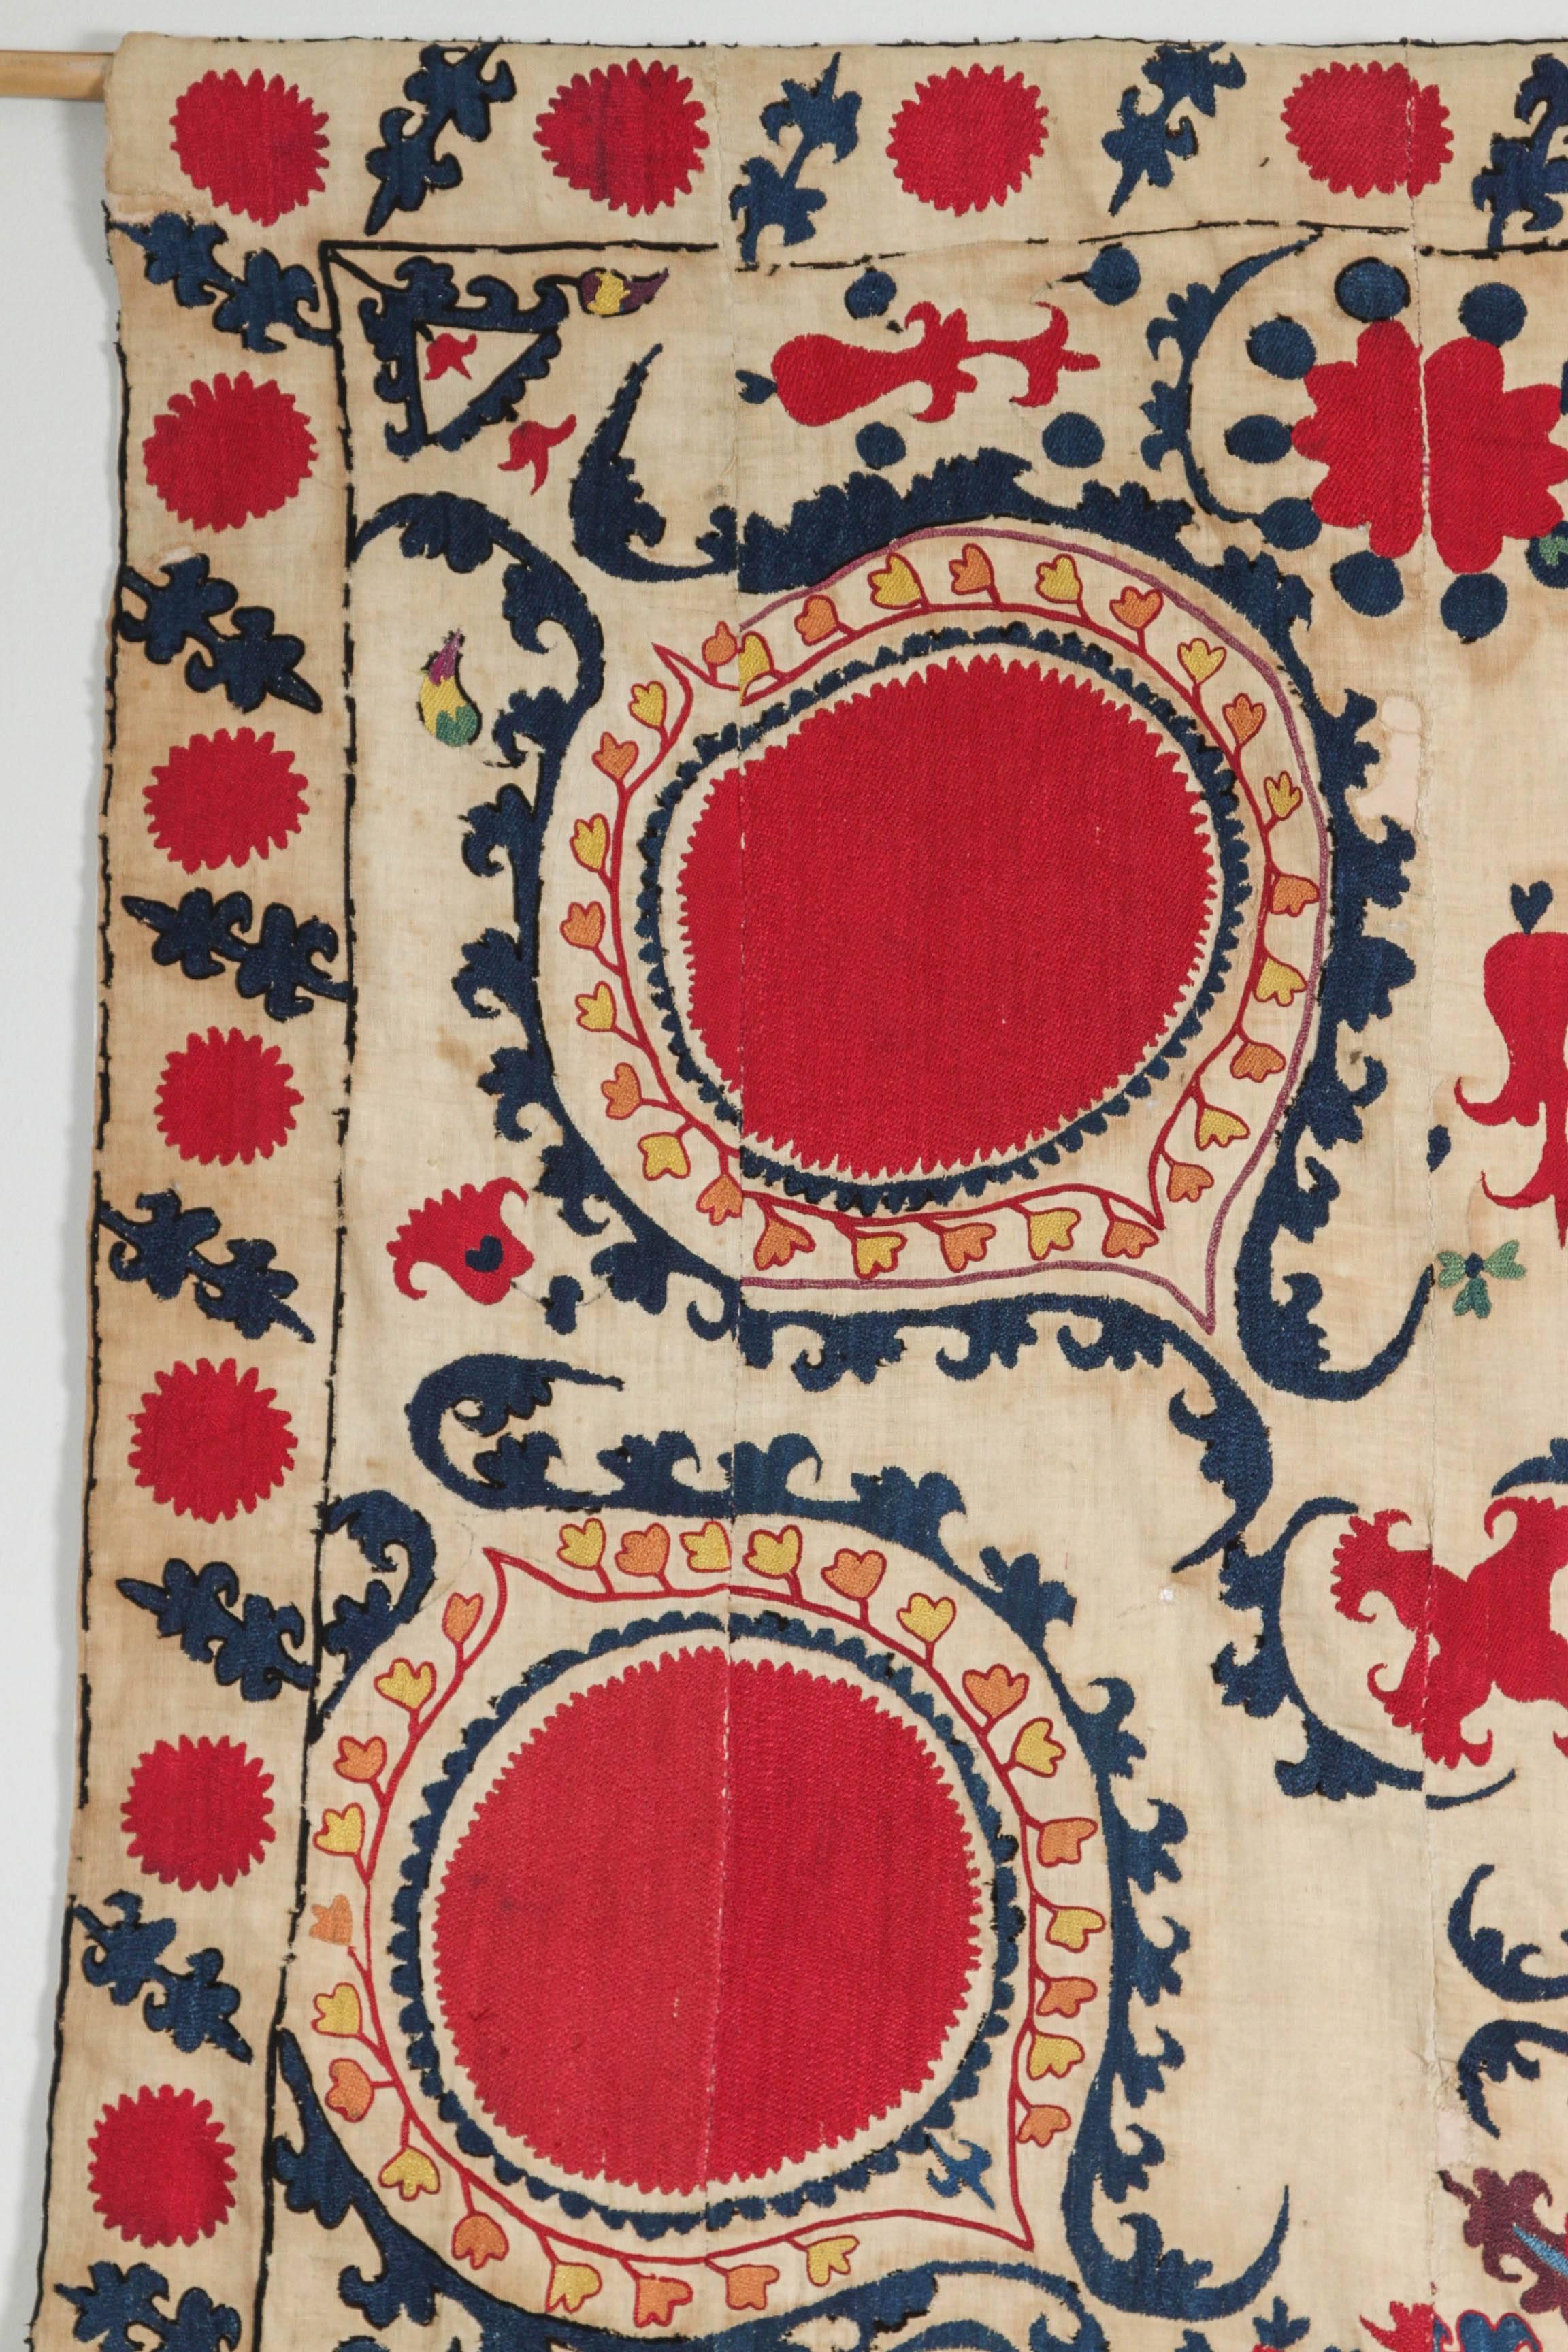 19th century Suzani textile. Silk floss thread embroidery on natural linen field. Backed with white cotton with a sleeve at top for hanging. Shows it's age in terms of condition and some staining. Check photos. Dark pink, red, blue, teal, and green.